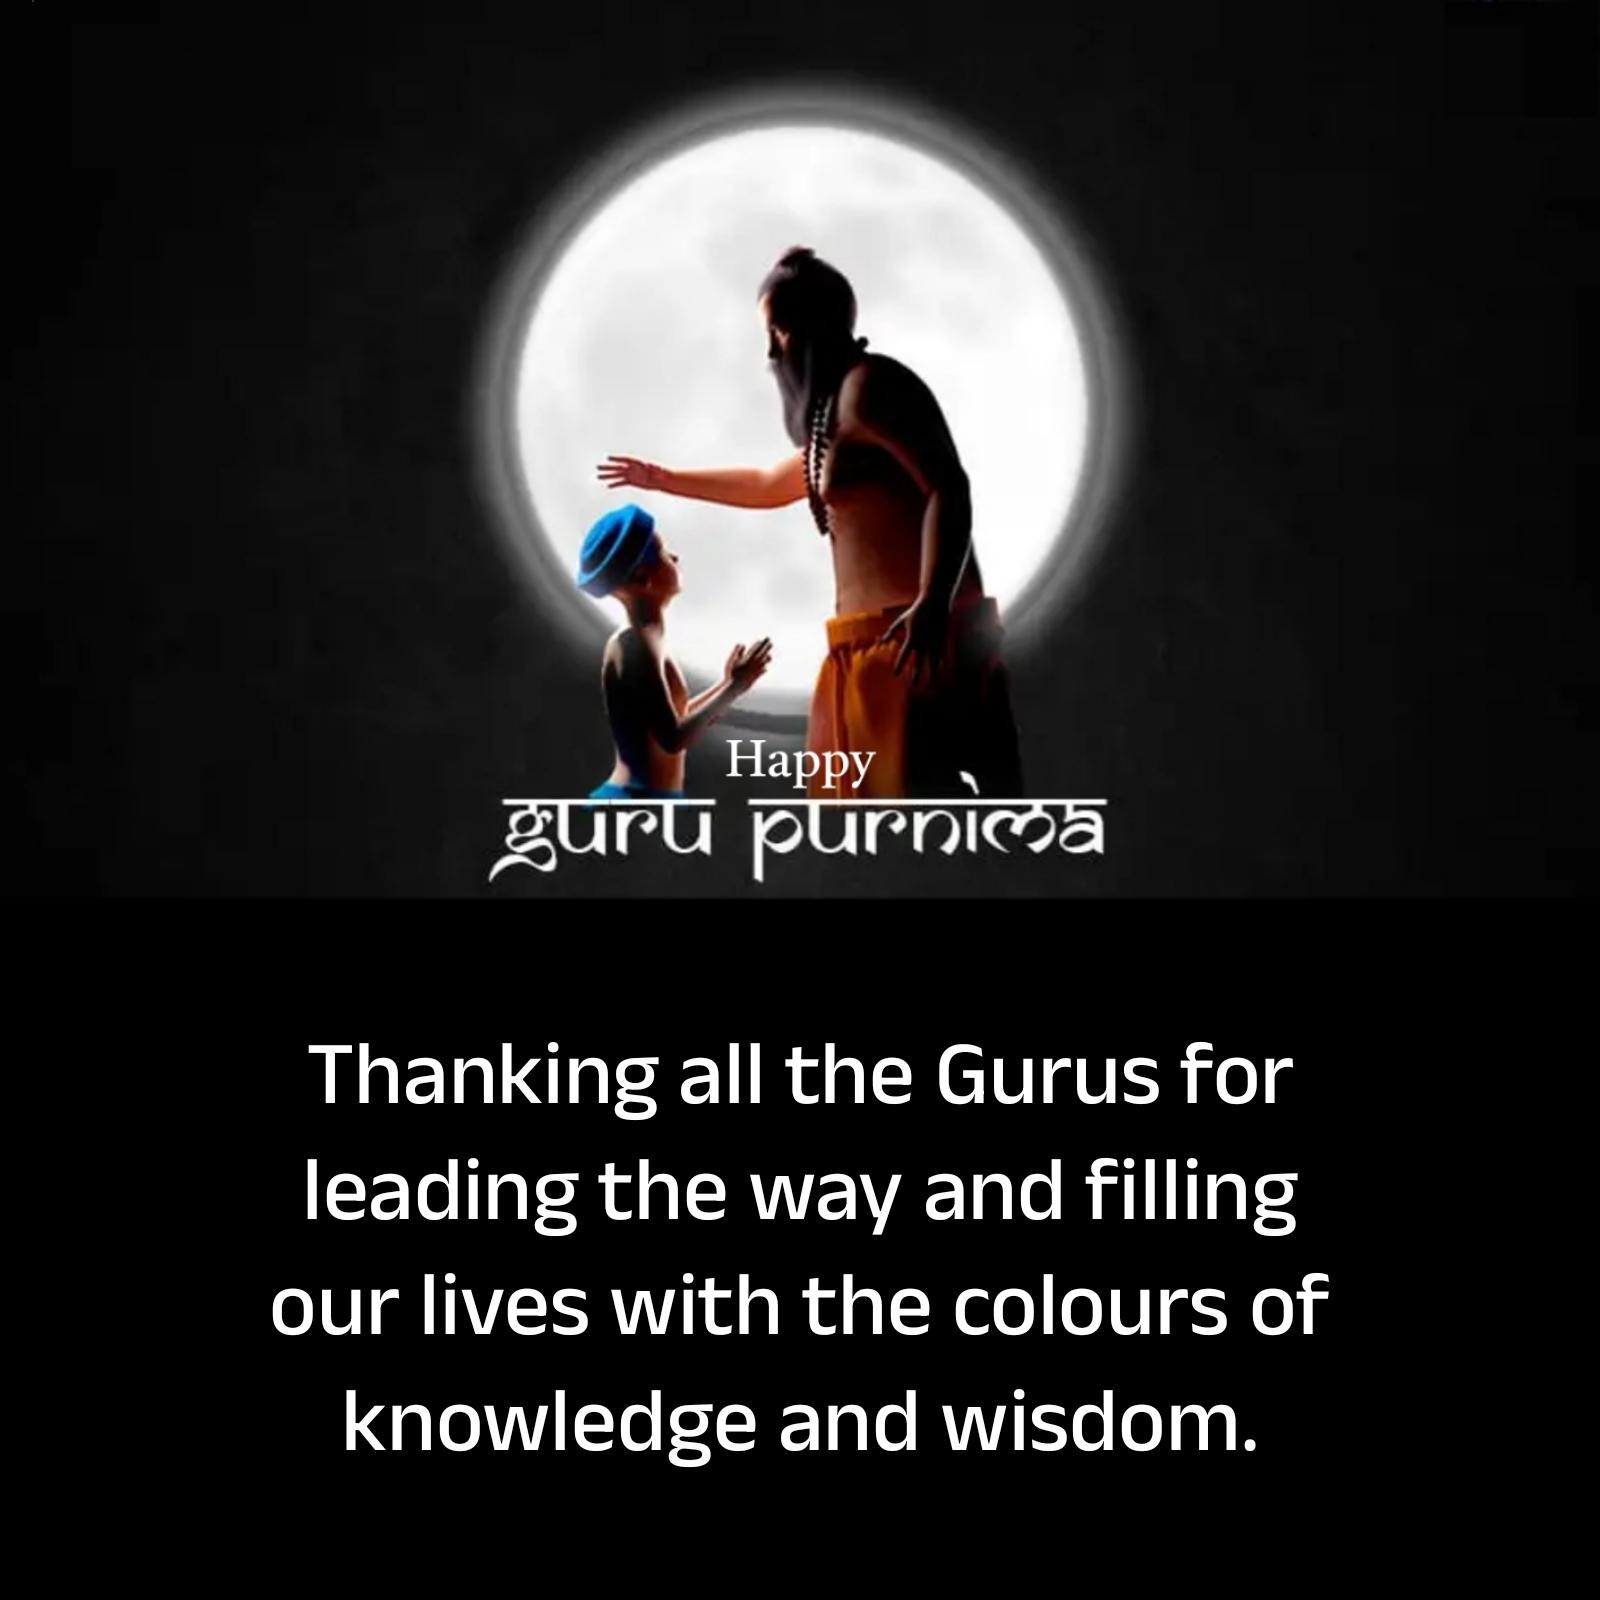 Thanking all the Gurus for leading the way and filling our lives